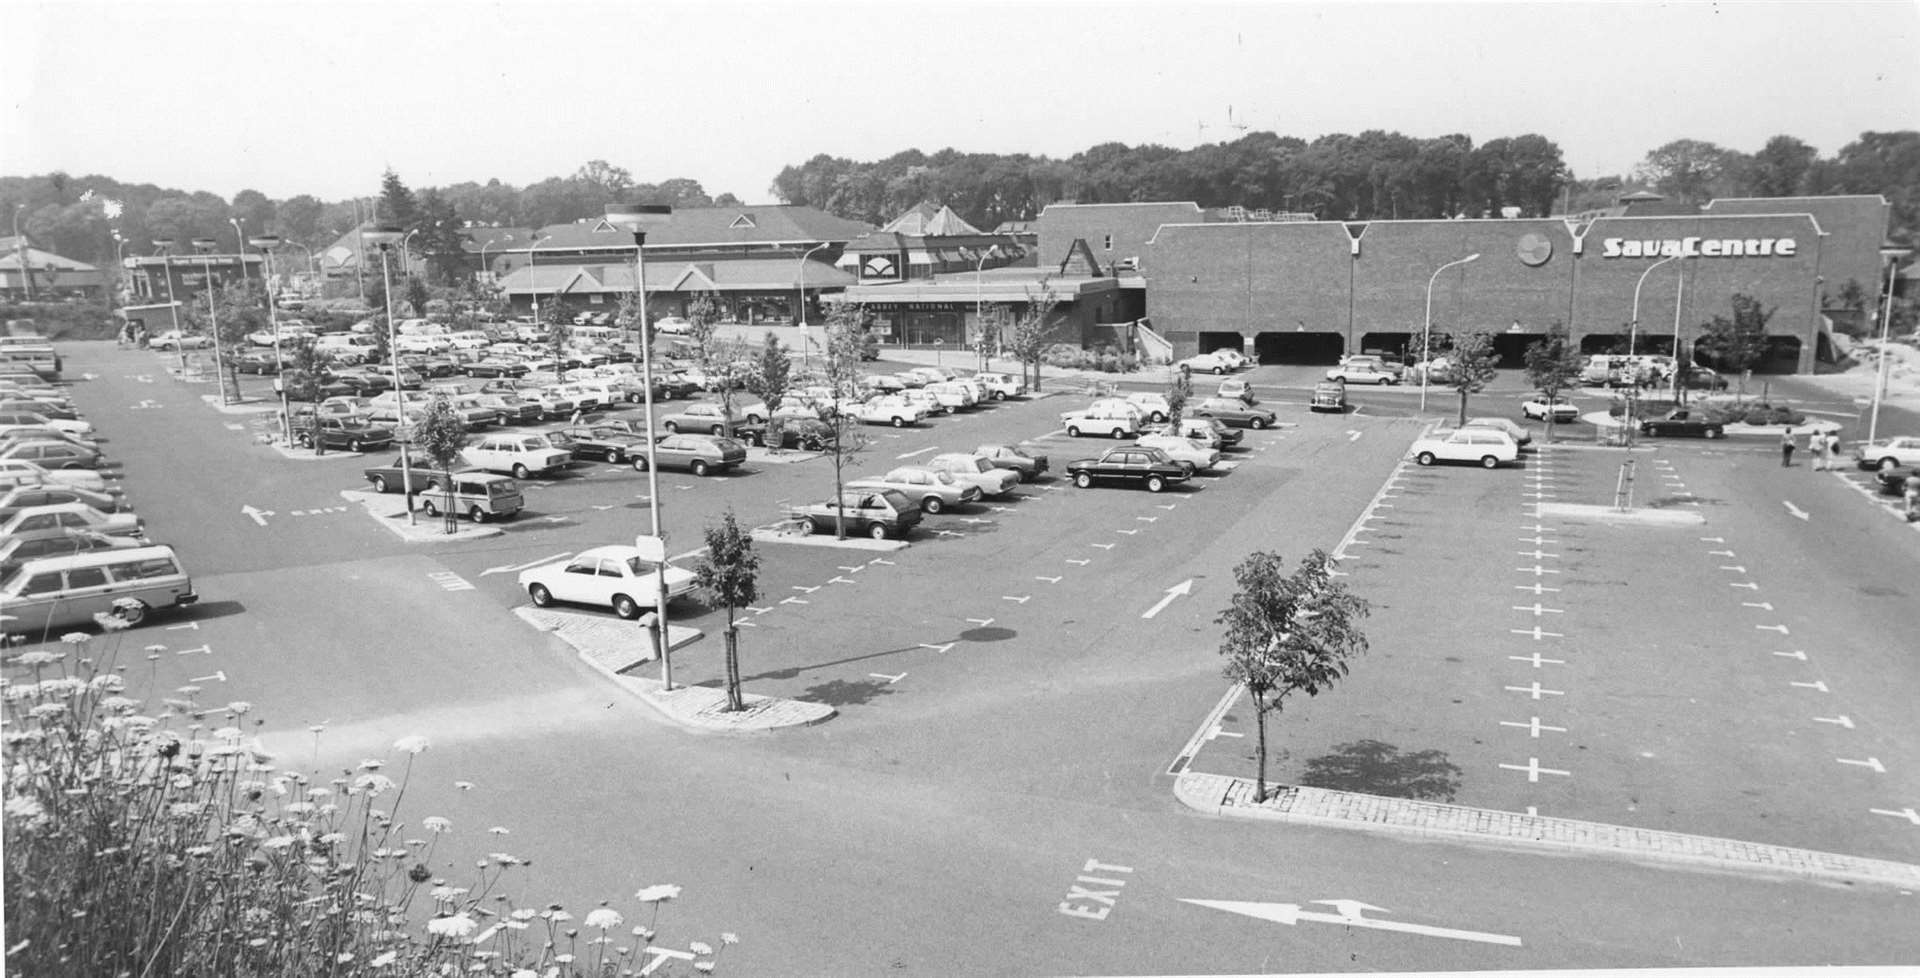 The Sava Centre in Gillingham, in July 1982 - now known as Hempstead Valley Shopping Centre